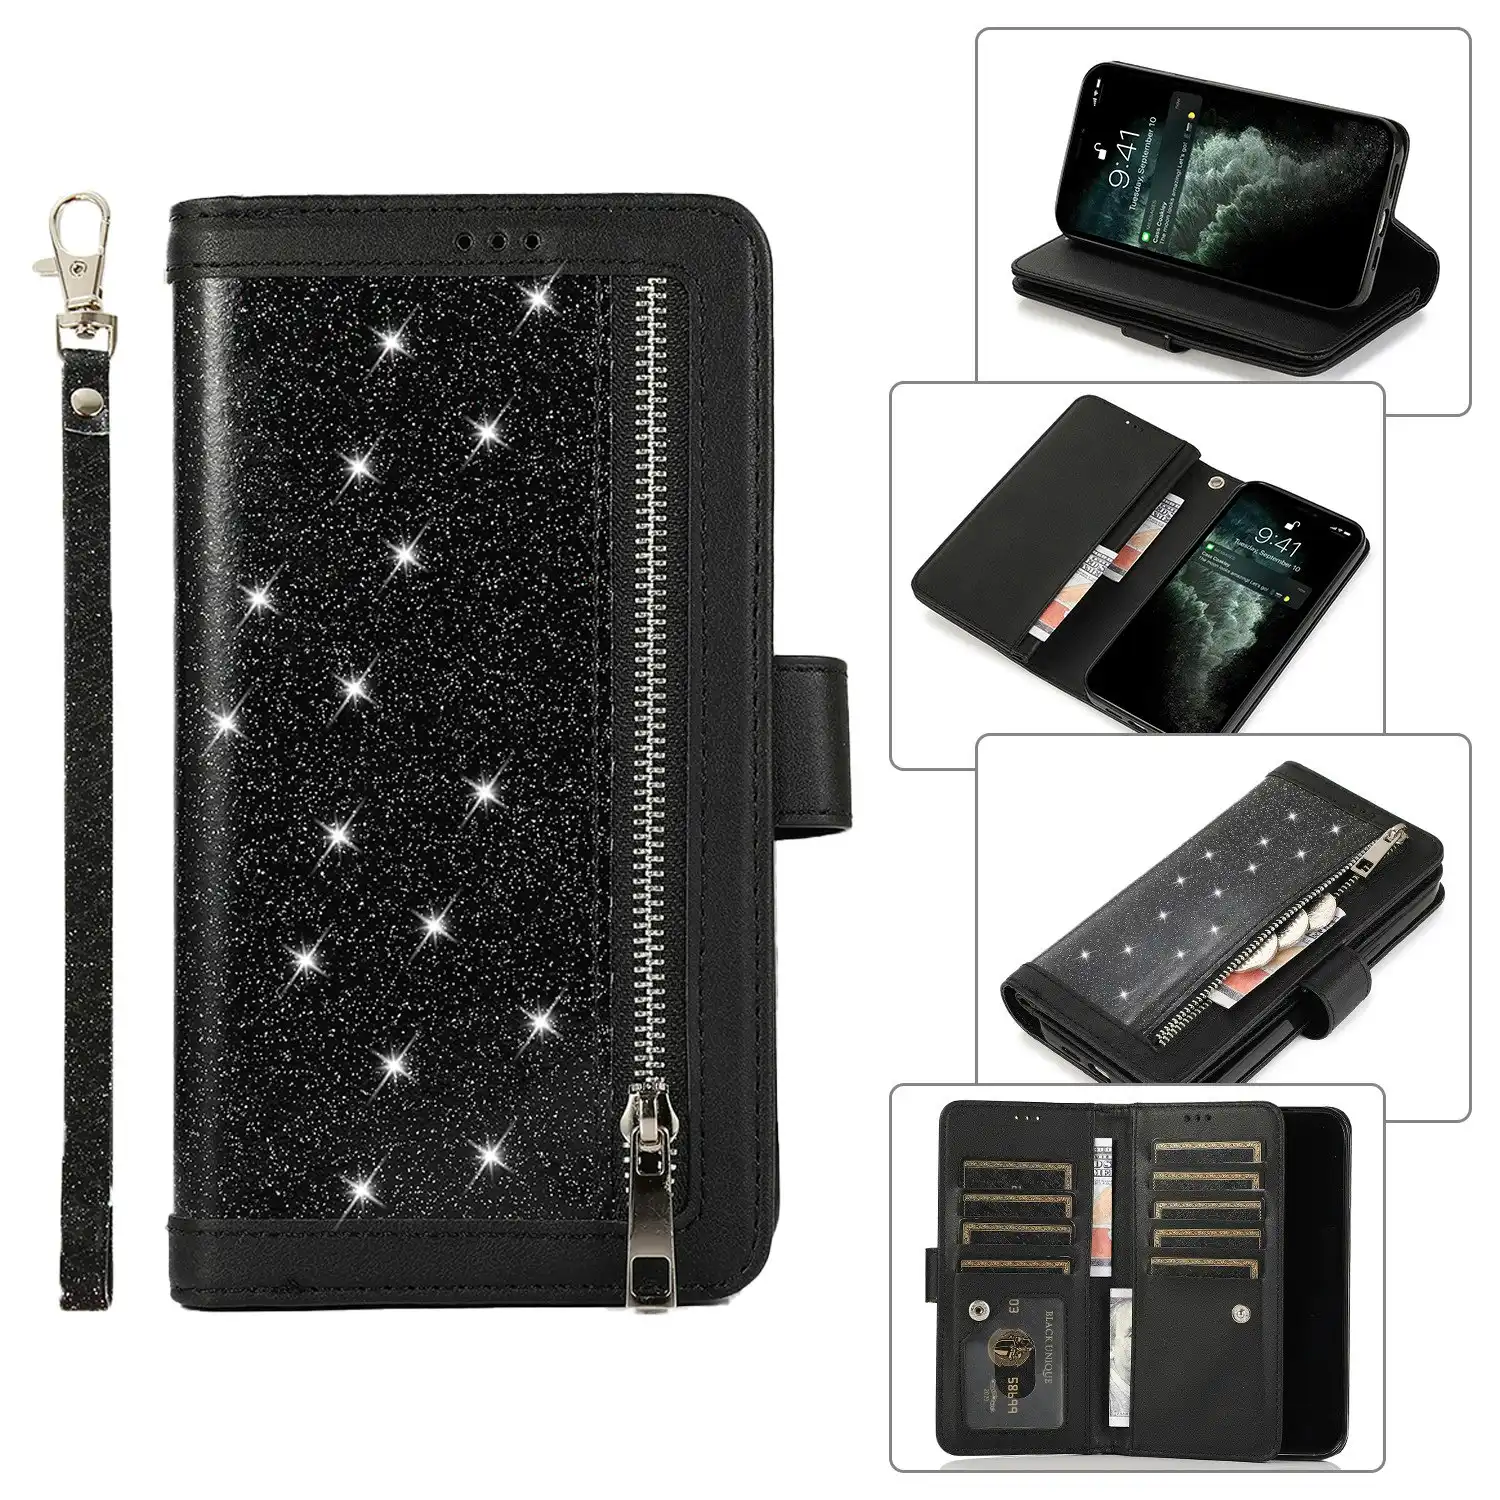 Zipper Pocket PU Leather Flip Wallet Case with 9 Card Slots for iPhone-Black